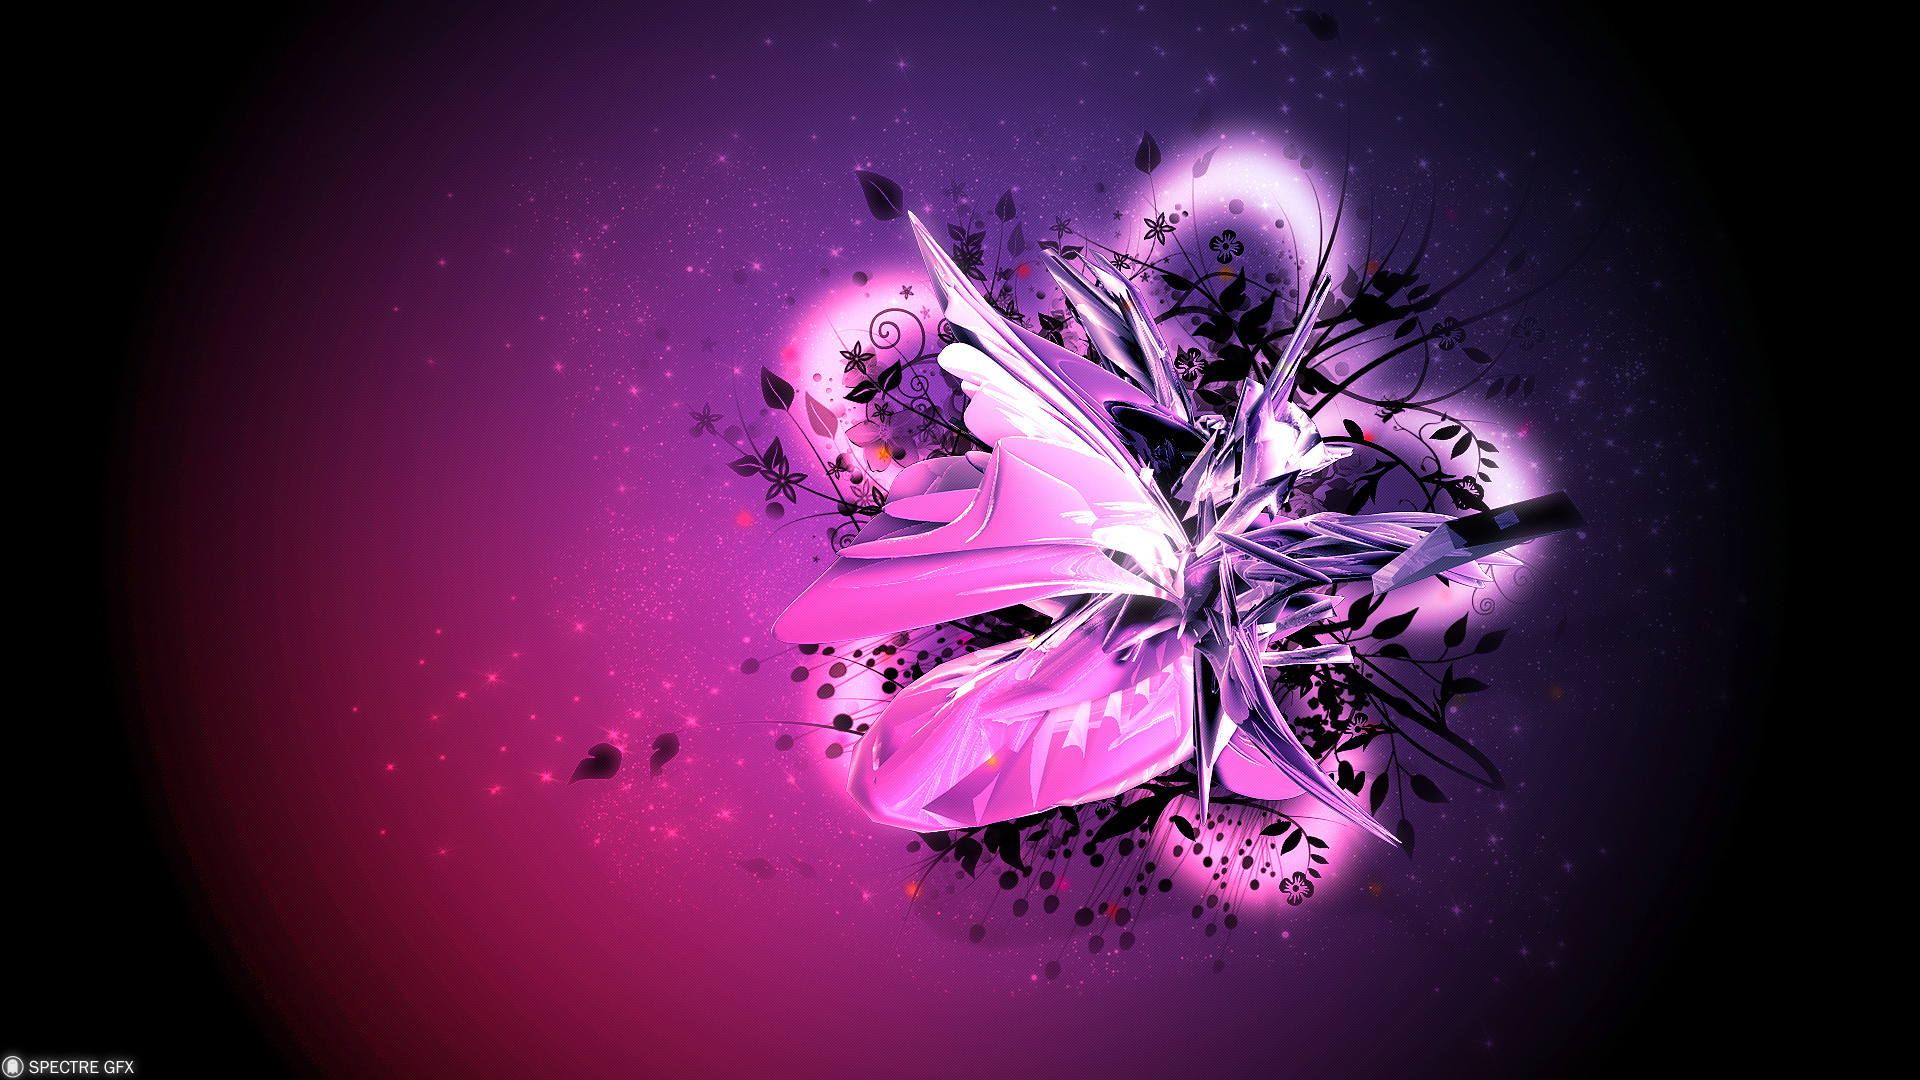 1920x1080 Cool 3d Abstract Widescreen Hd Wallpaper Amazing Wallpaperz Black And Purple  Wallpapers For Laptops. bedroom ...